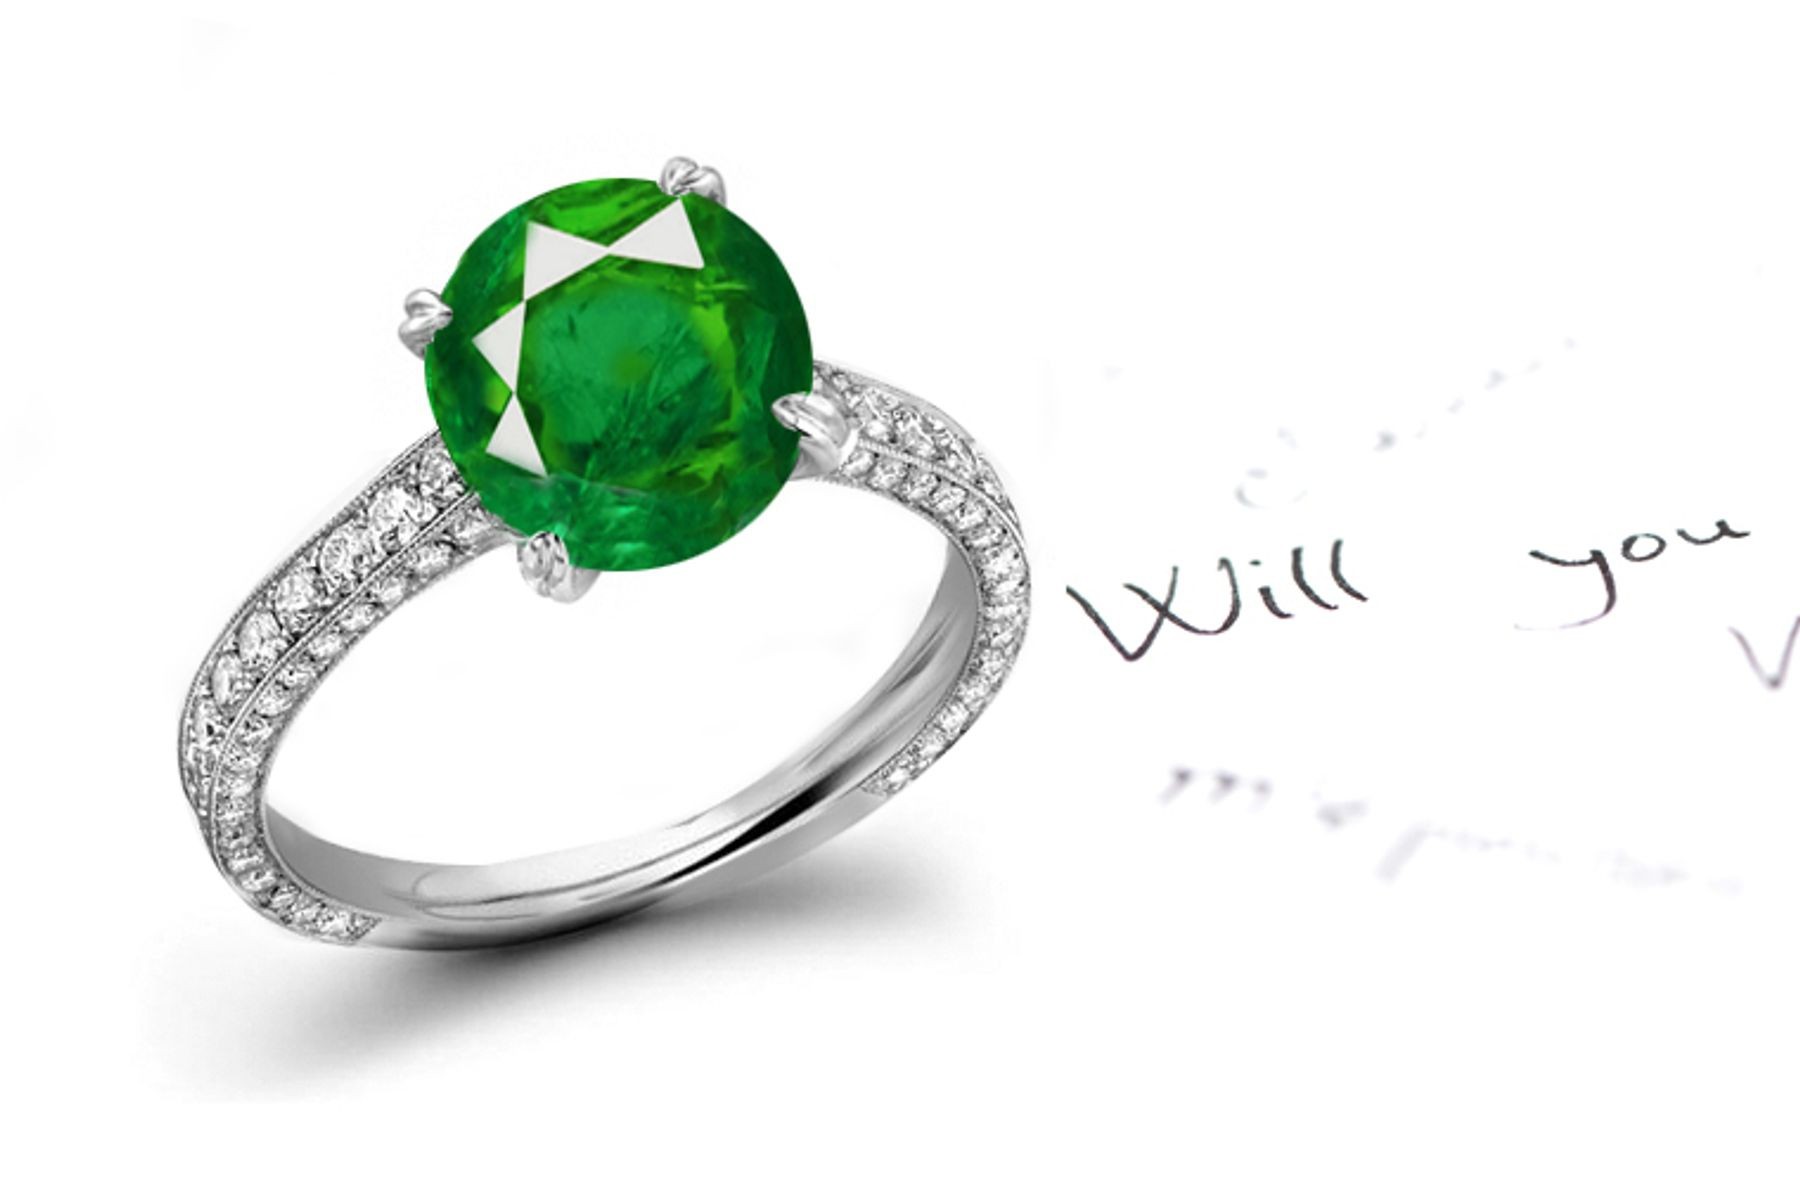 Work of Art: Shop French Art Deco Pave' Emerald Diamond Gold Ring in Platinum